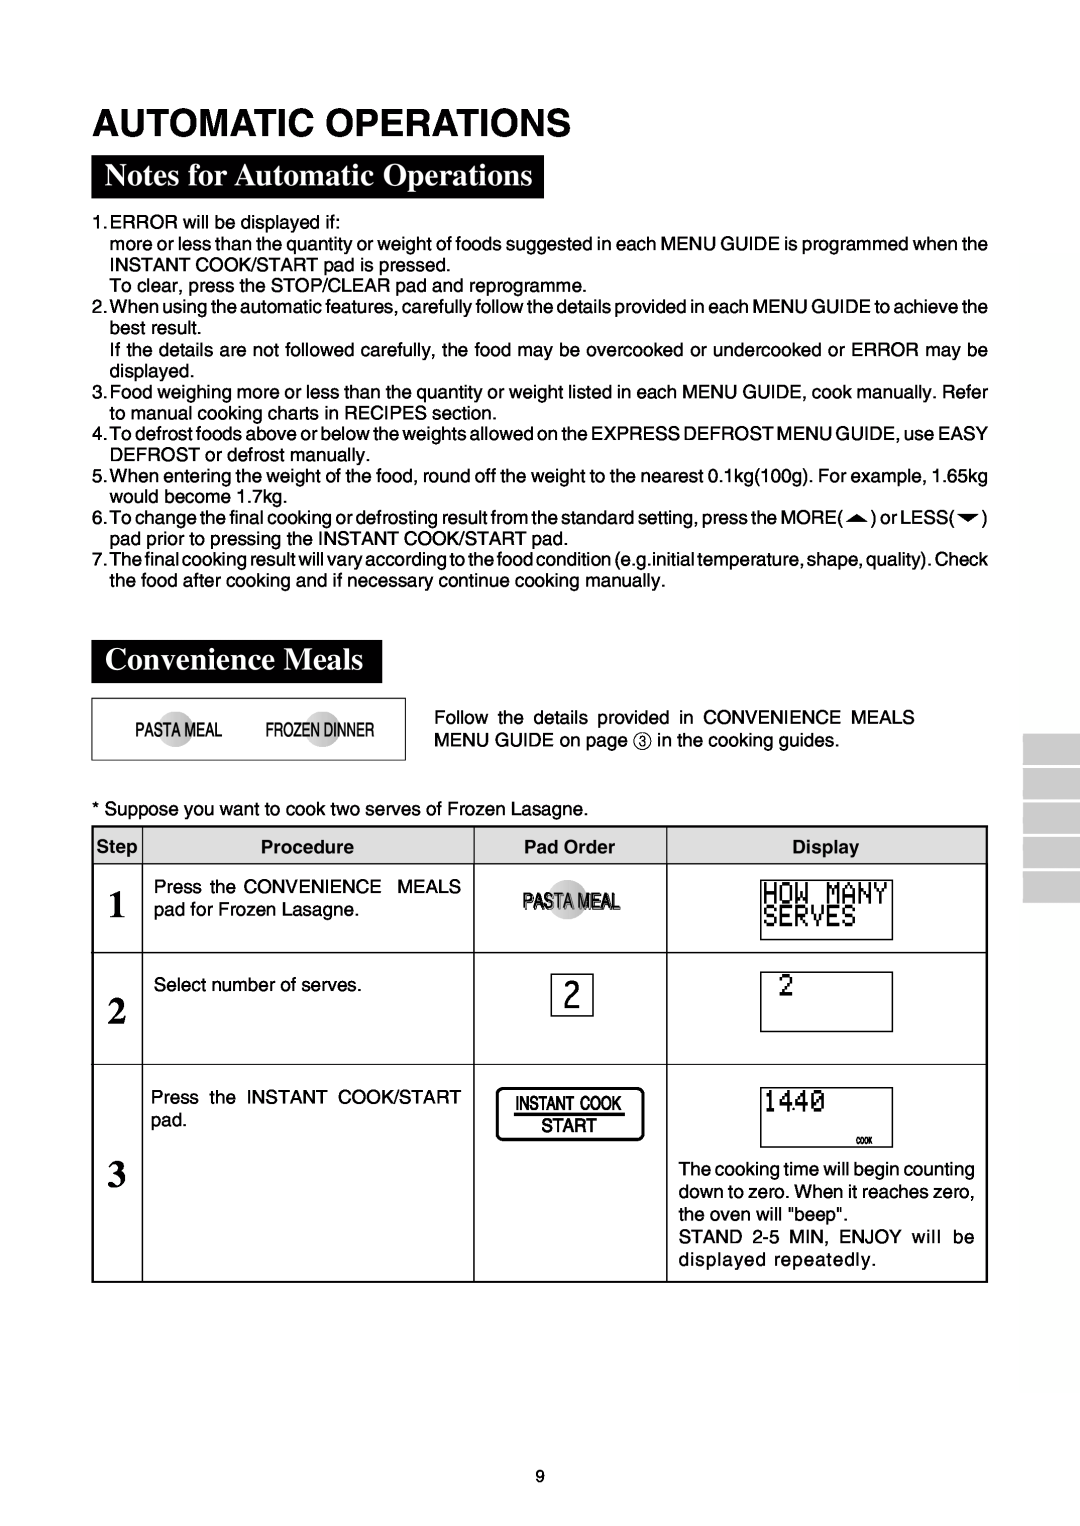 Sharp R-350E operation manual Notes for Automatic Operations, Convenience Meals, 1 2 3 4 5 6 7 